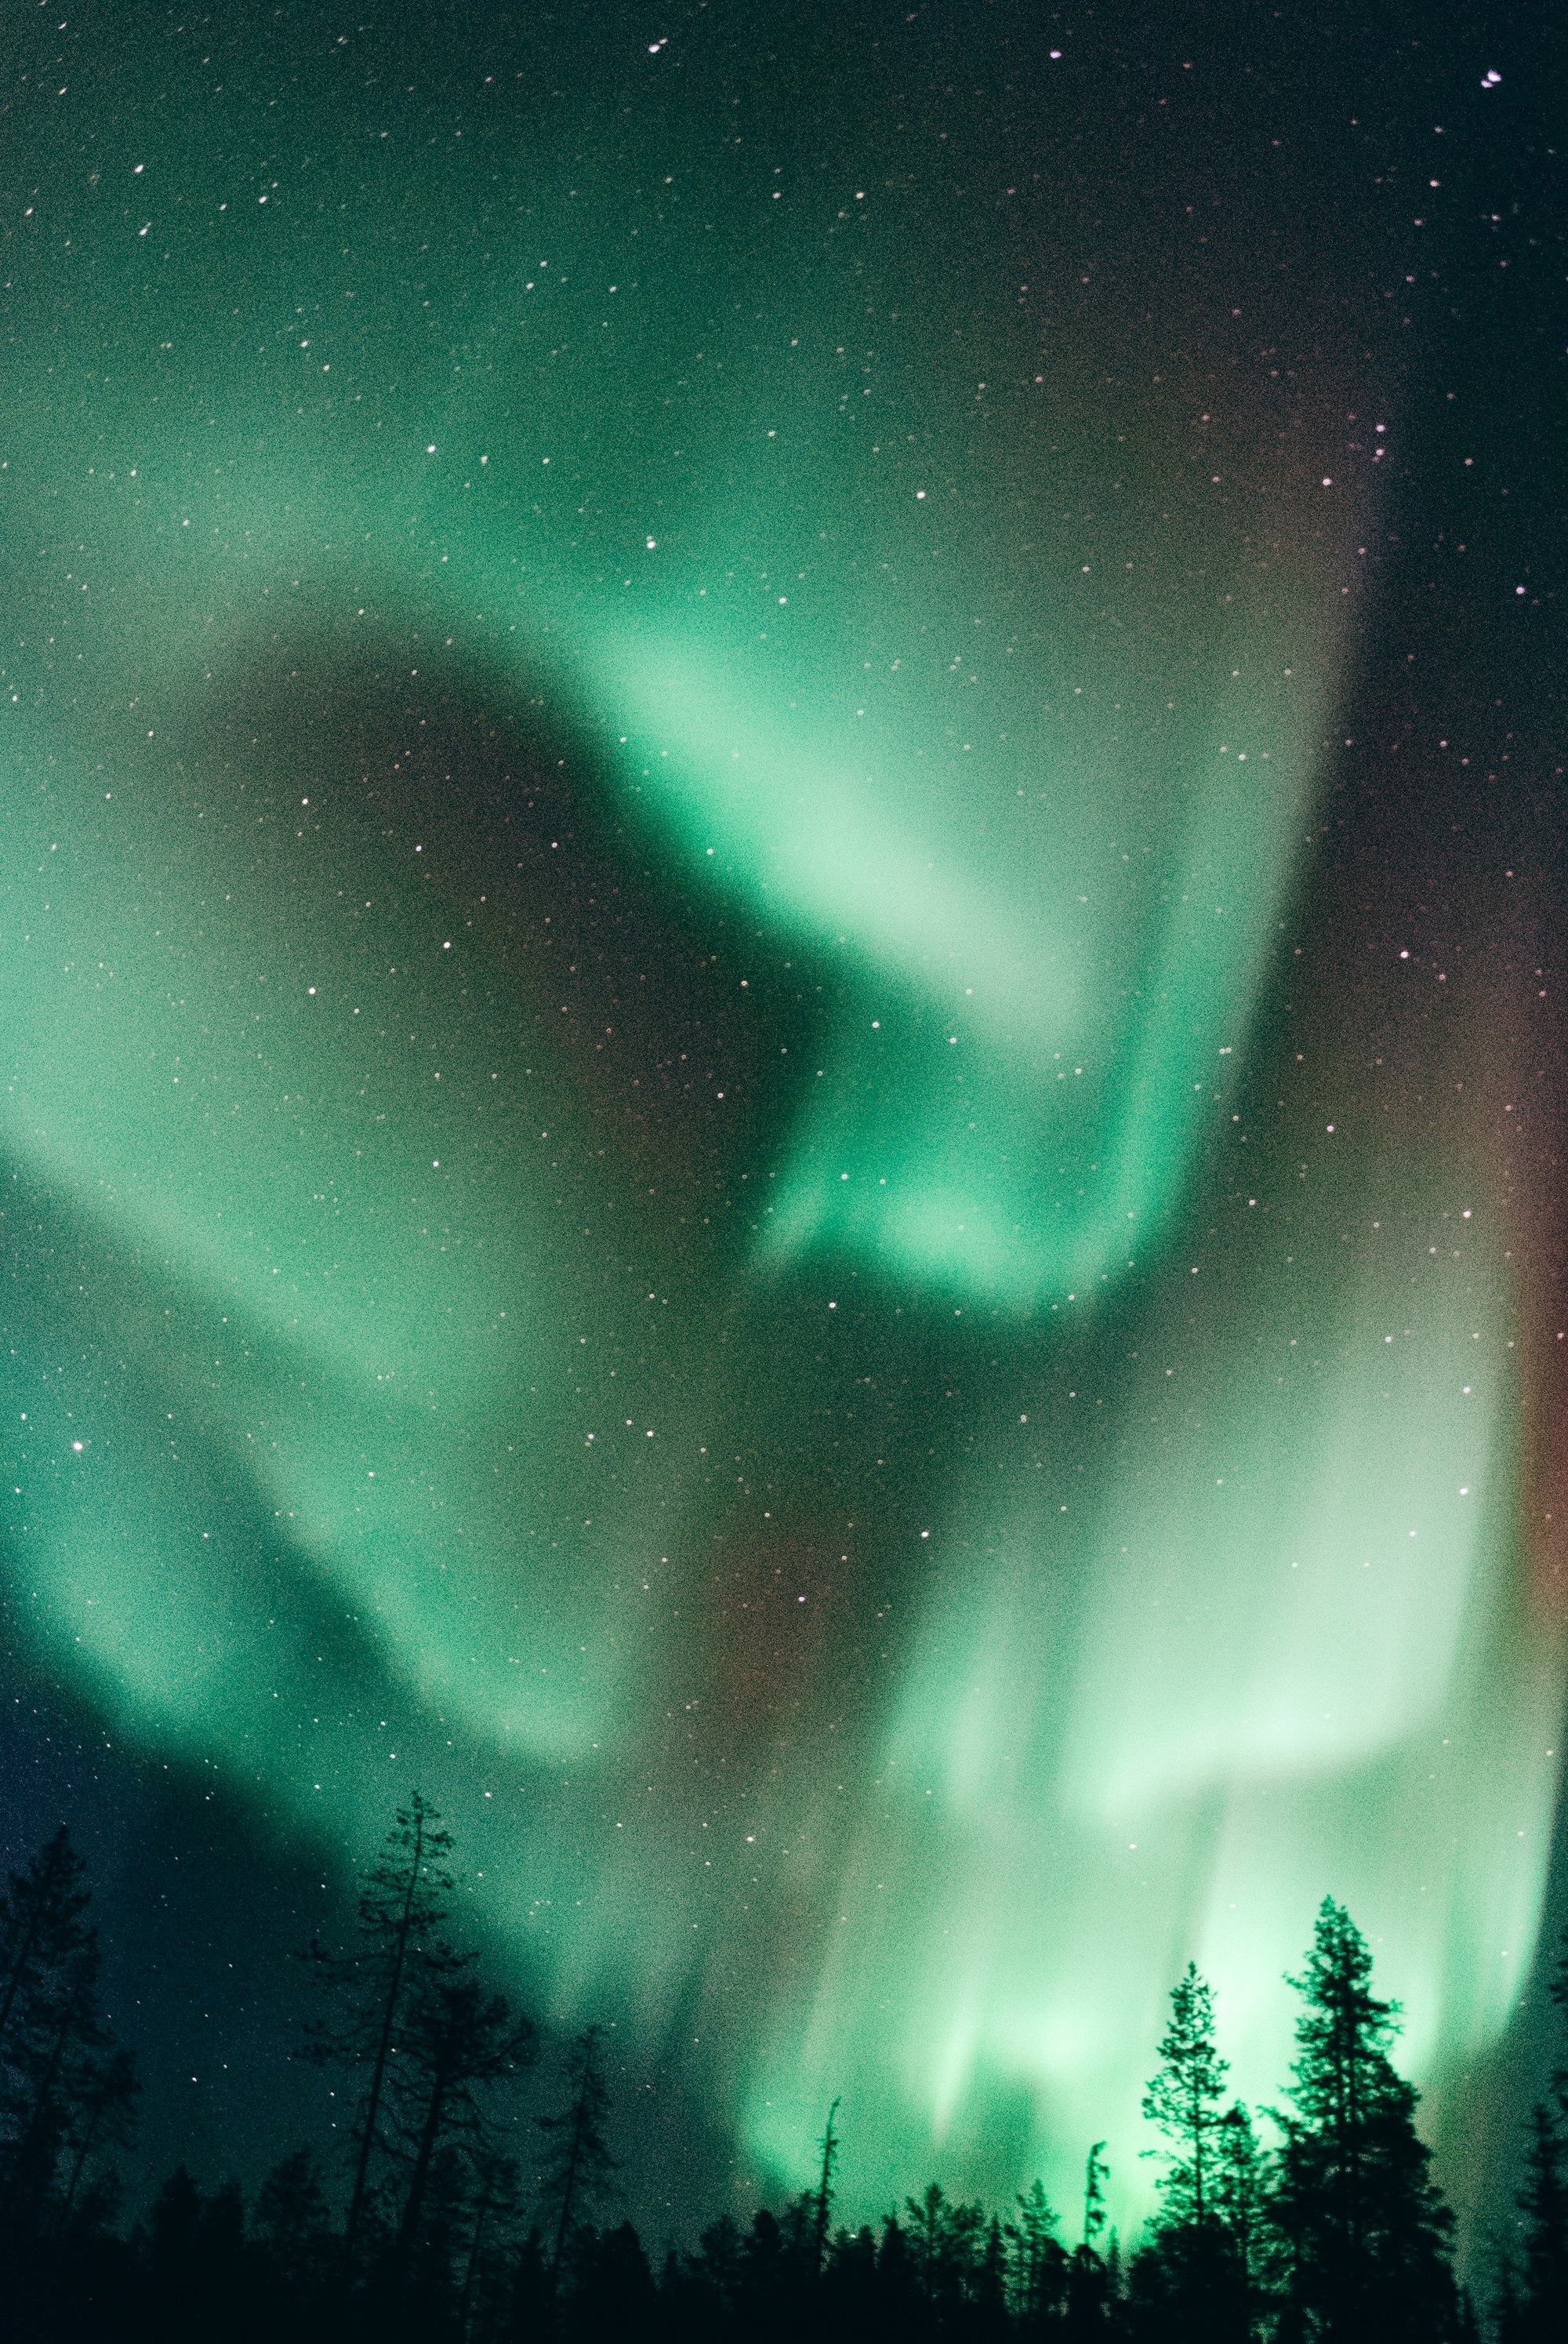 The northern lights in a freezing March night in Ylläsjarvi, a small village in the Finnish Lapland. The northern lights are the most beautiful, awe inspiring and amazing thing in nature.
Portfolio and Prints: http://www.lucasmarcomini.com
Society6: https://bit.ly/2VpQ4mb
Instagram: https://bit.ly/2yS9Ajy